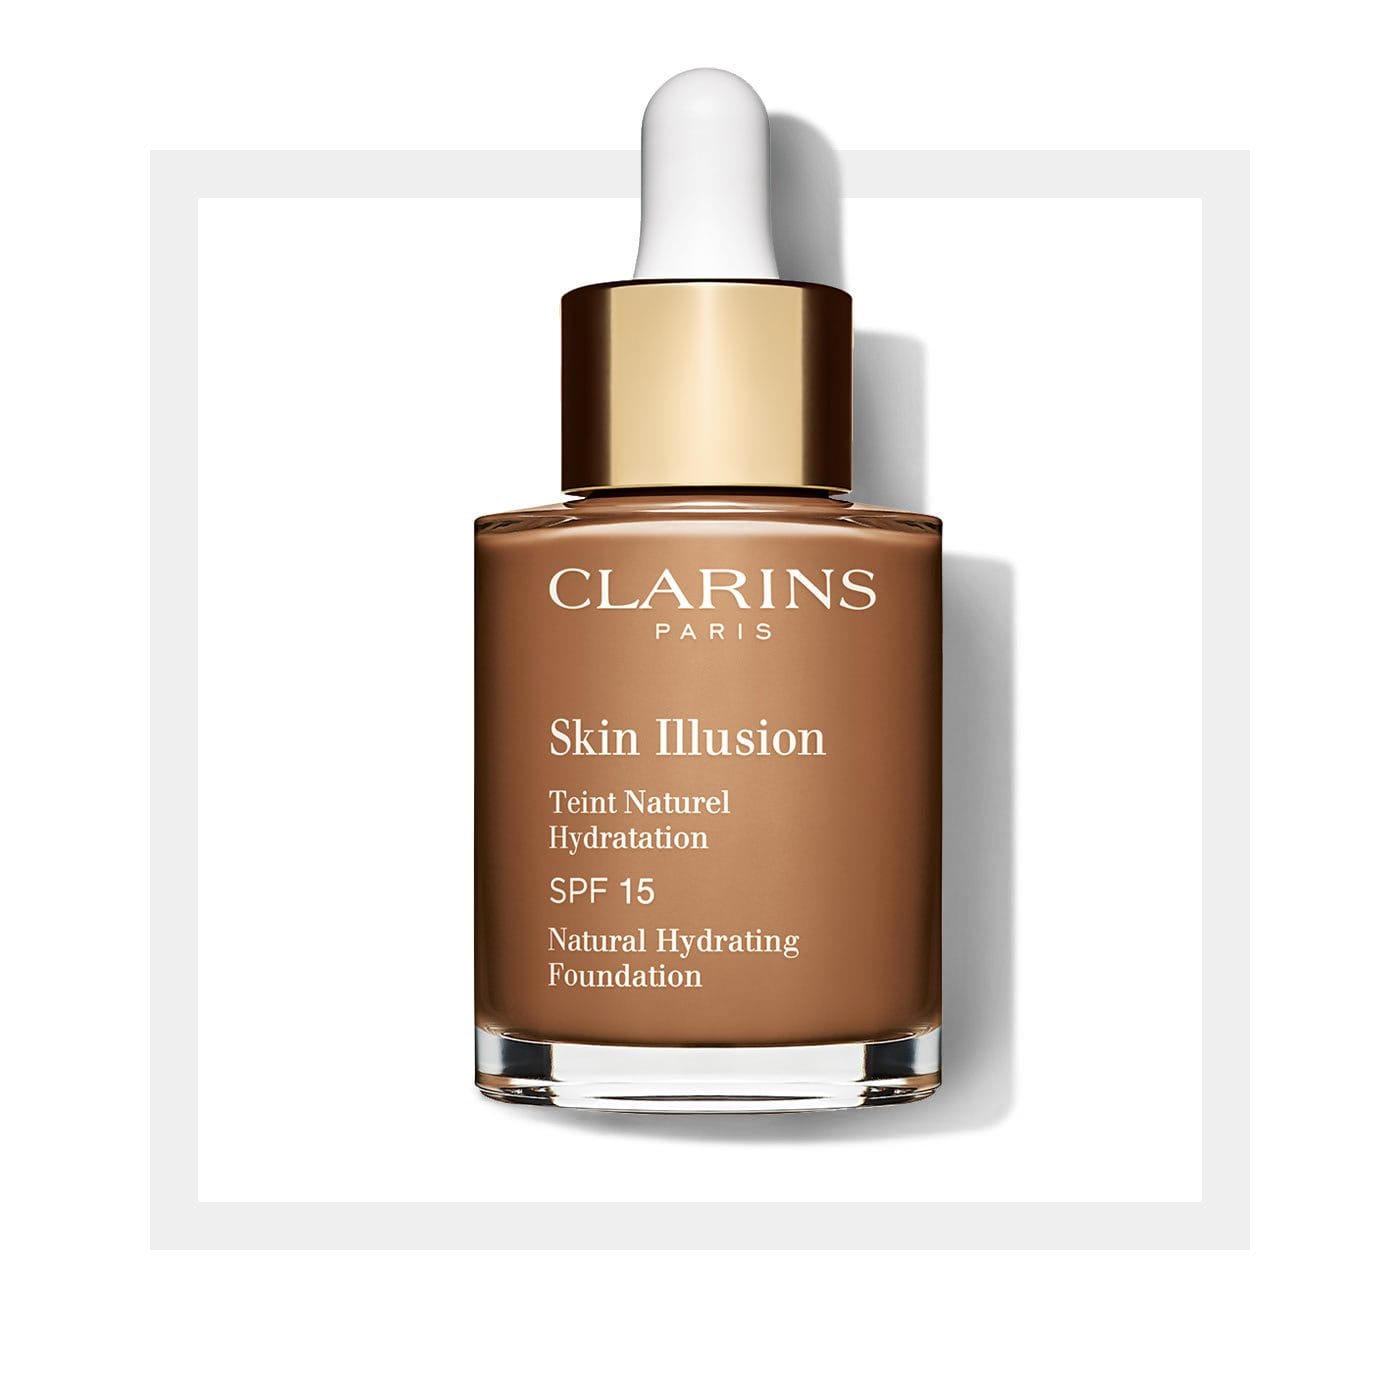 Clarins Beauty Clarins Skin Illusion Natural Hydrating Foundation 115 Cognac 3380810234442 224709